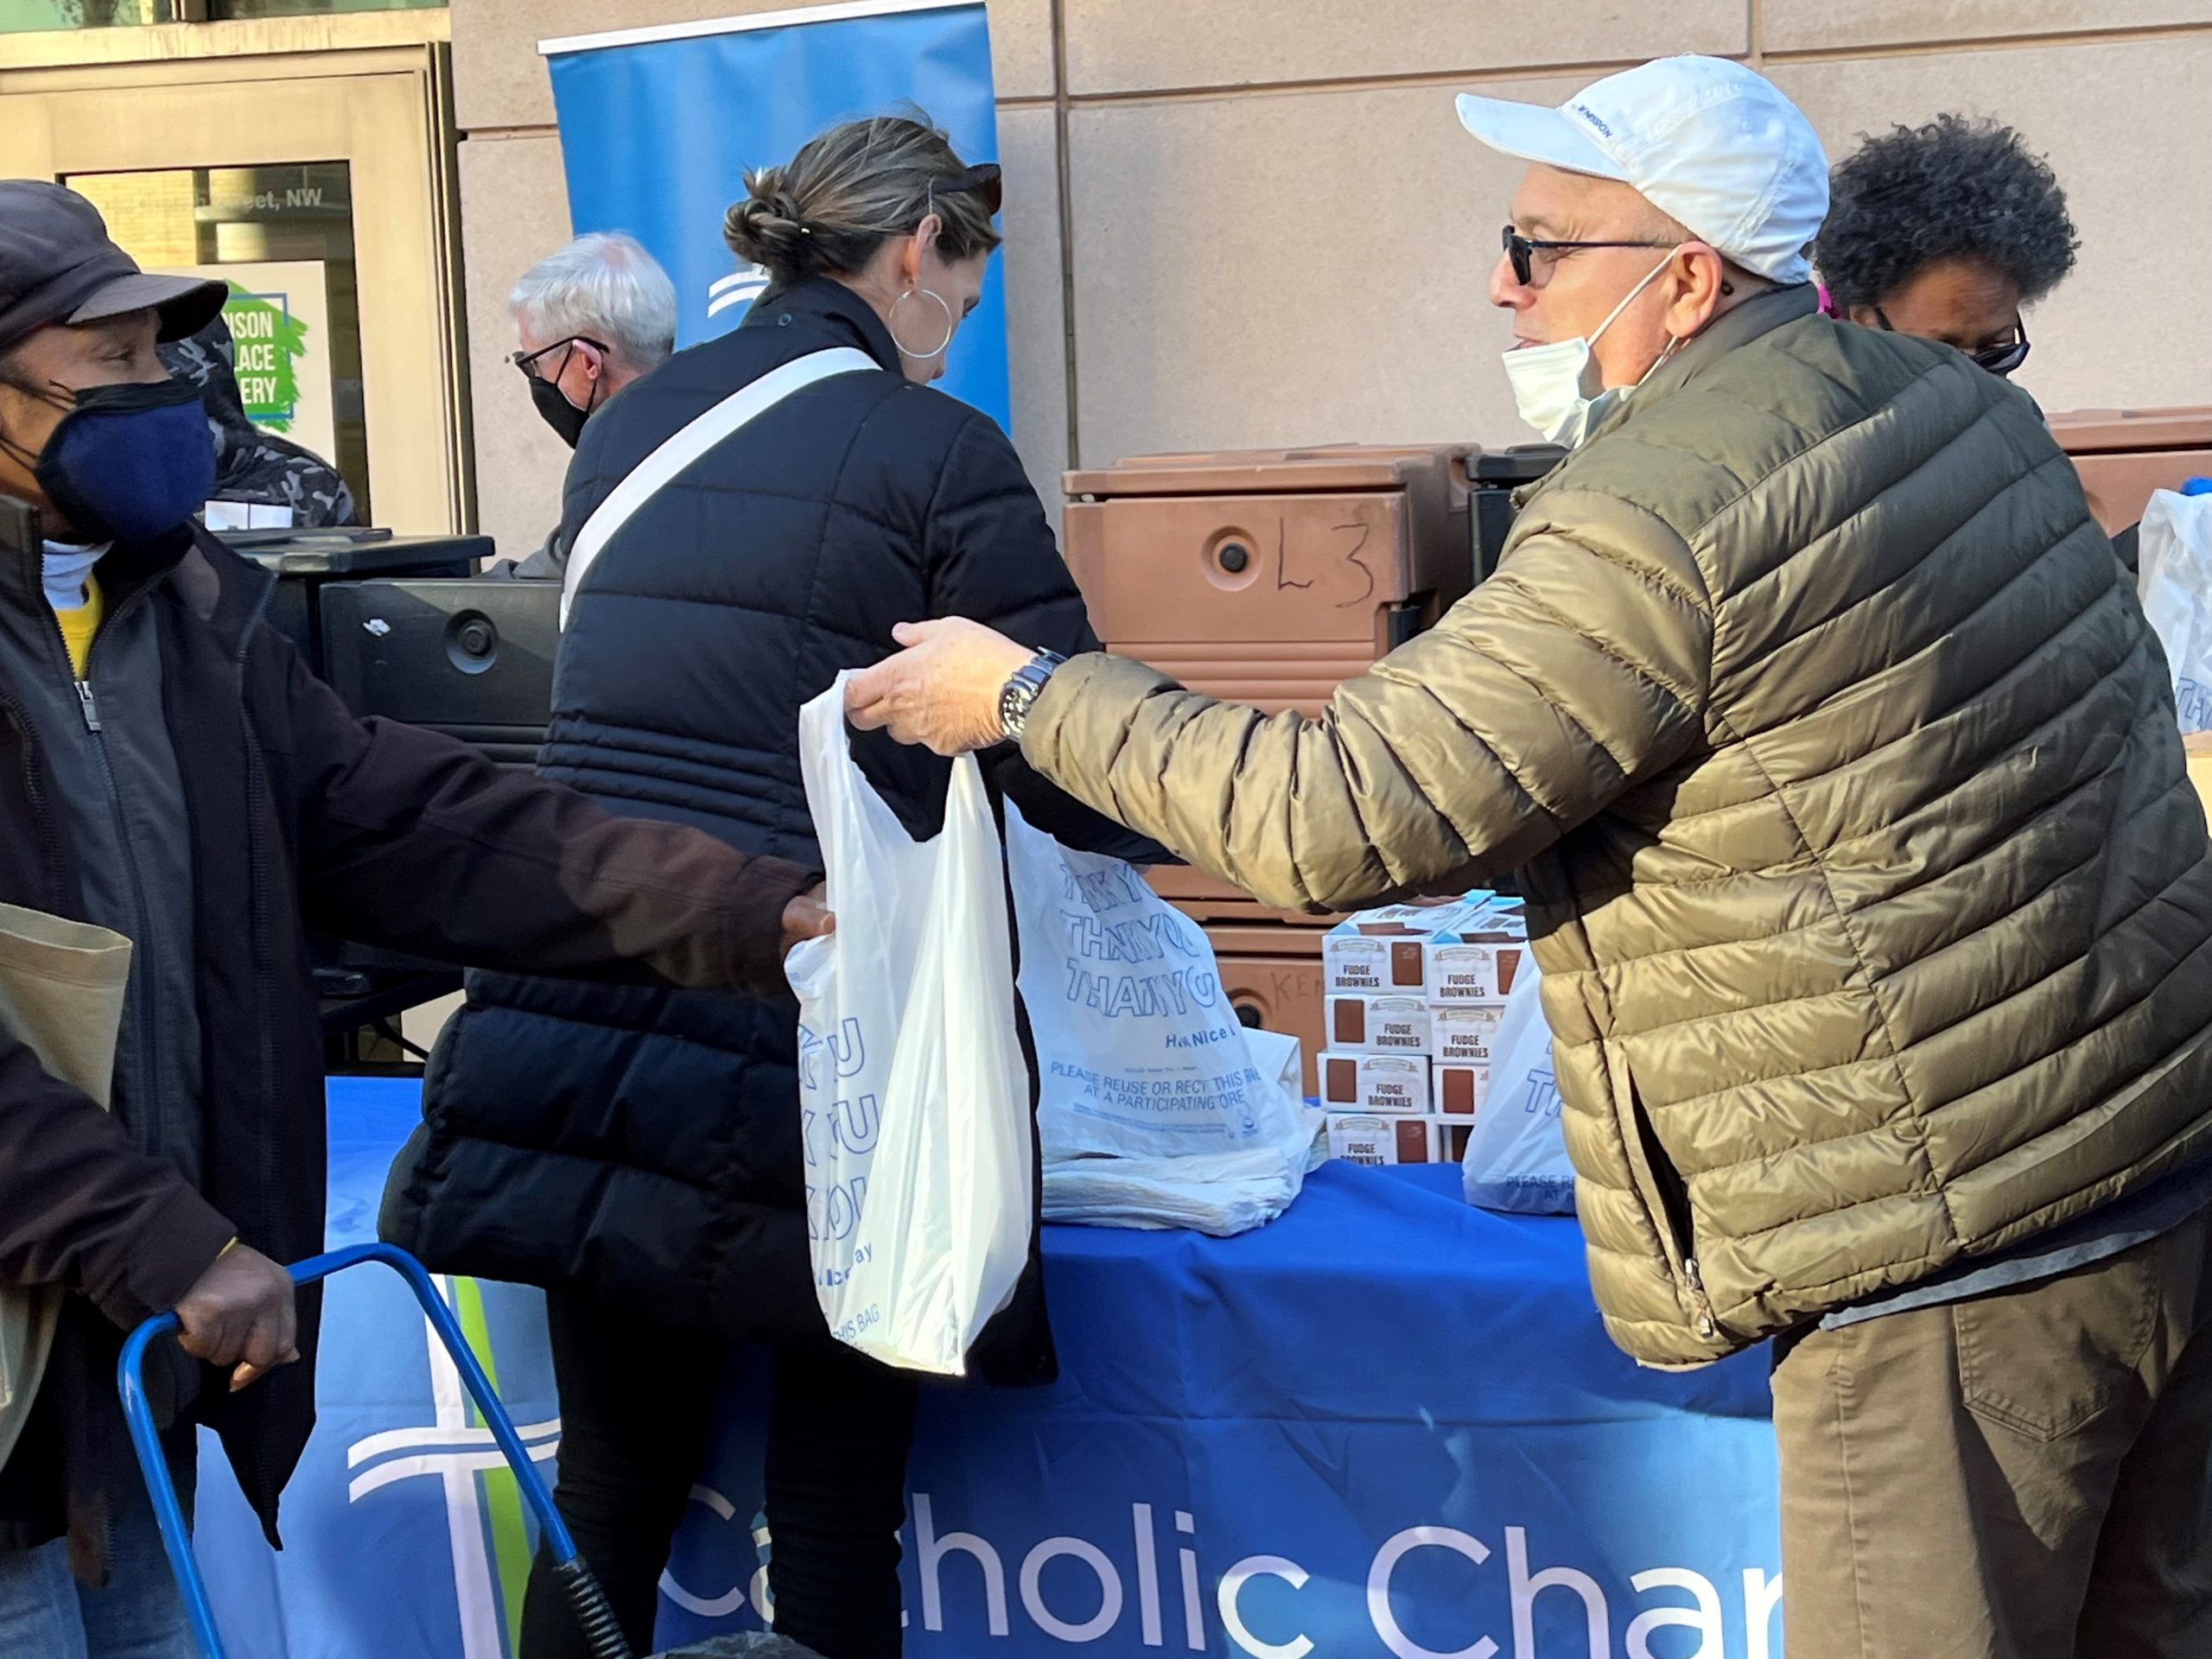 Food Services - Catholic Charities DC